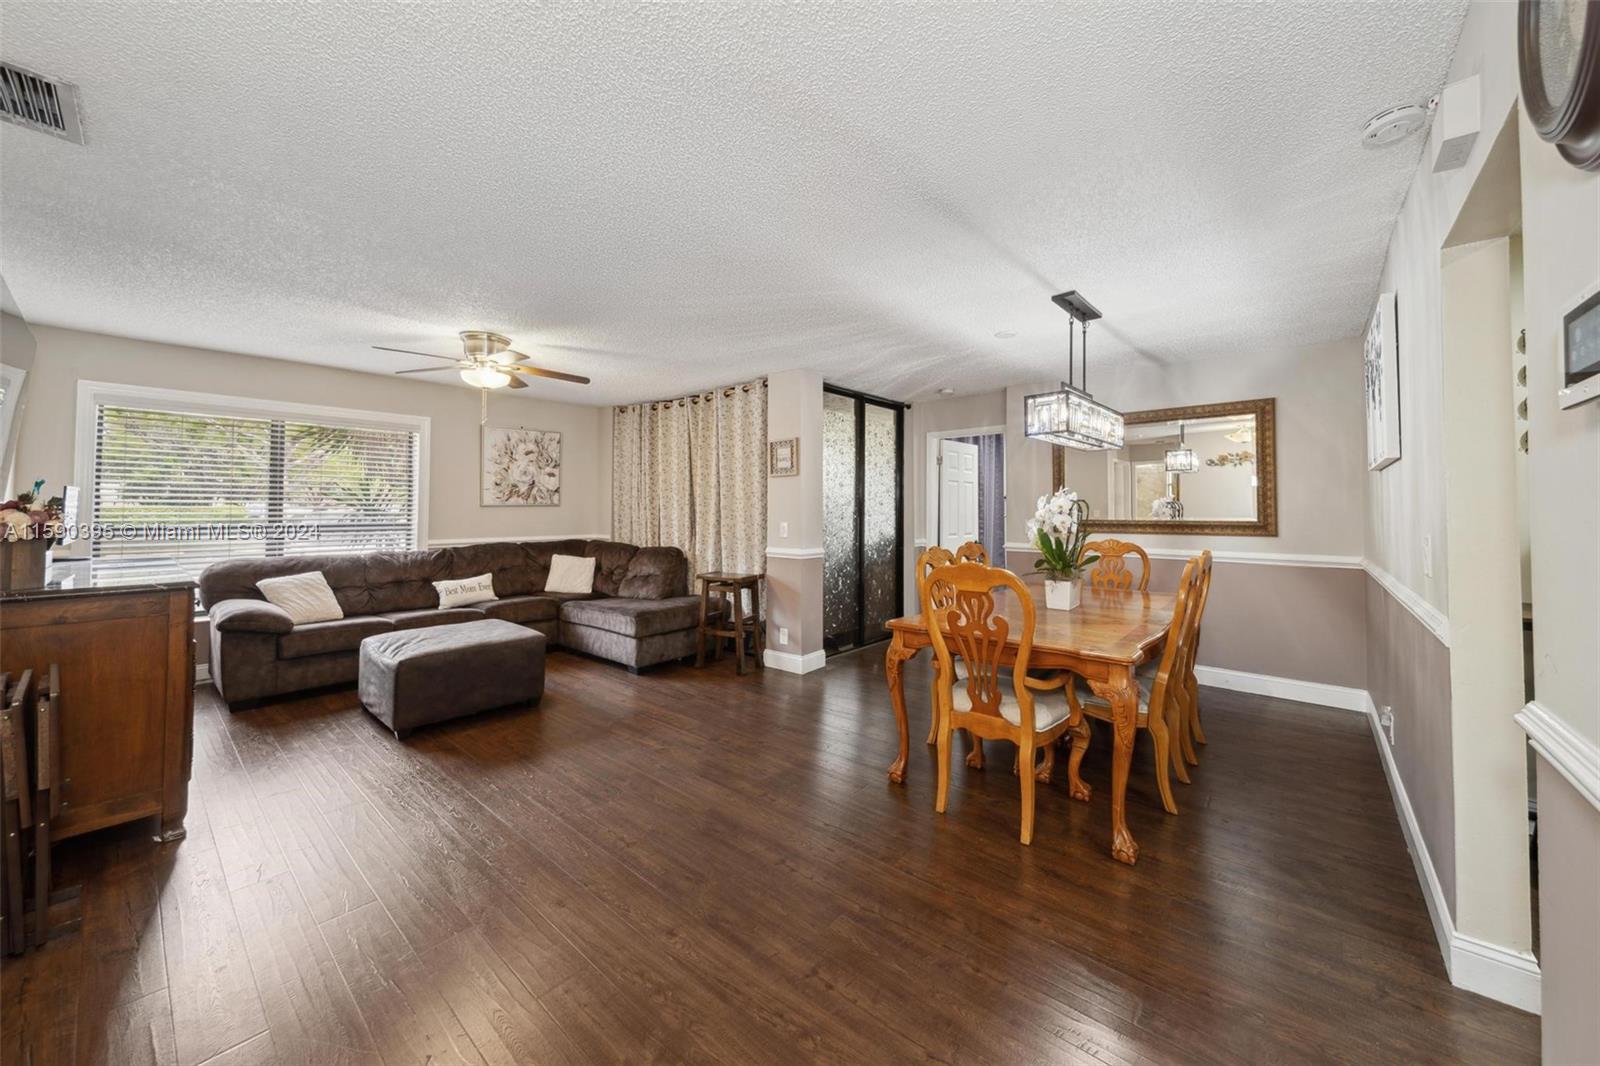 Enjoy the open family room and spacious dining room.